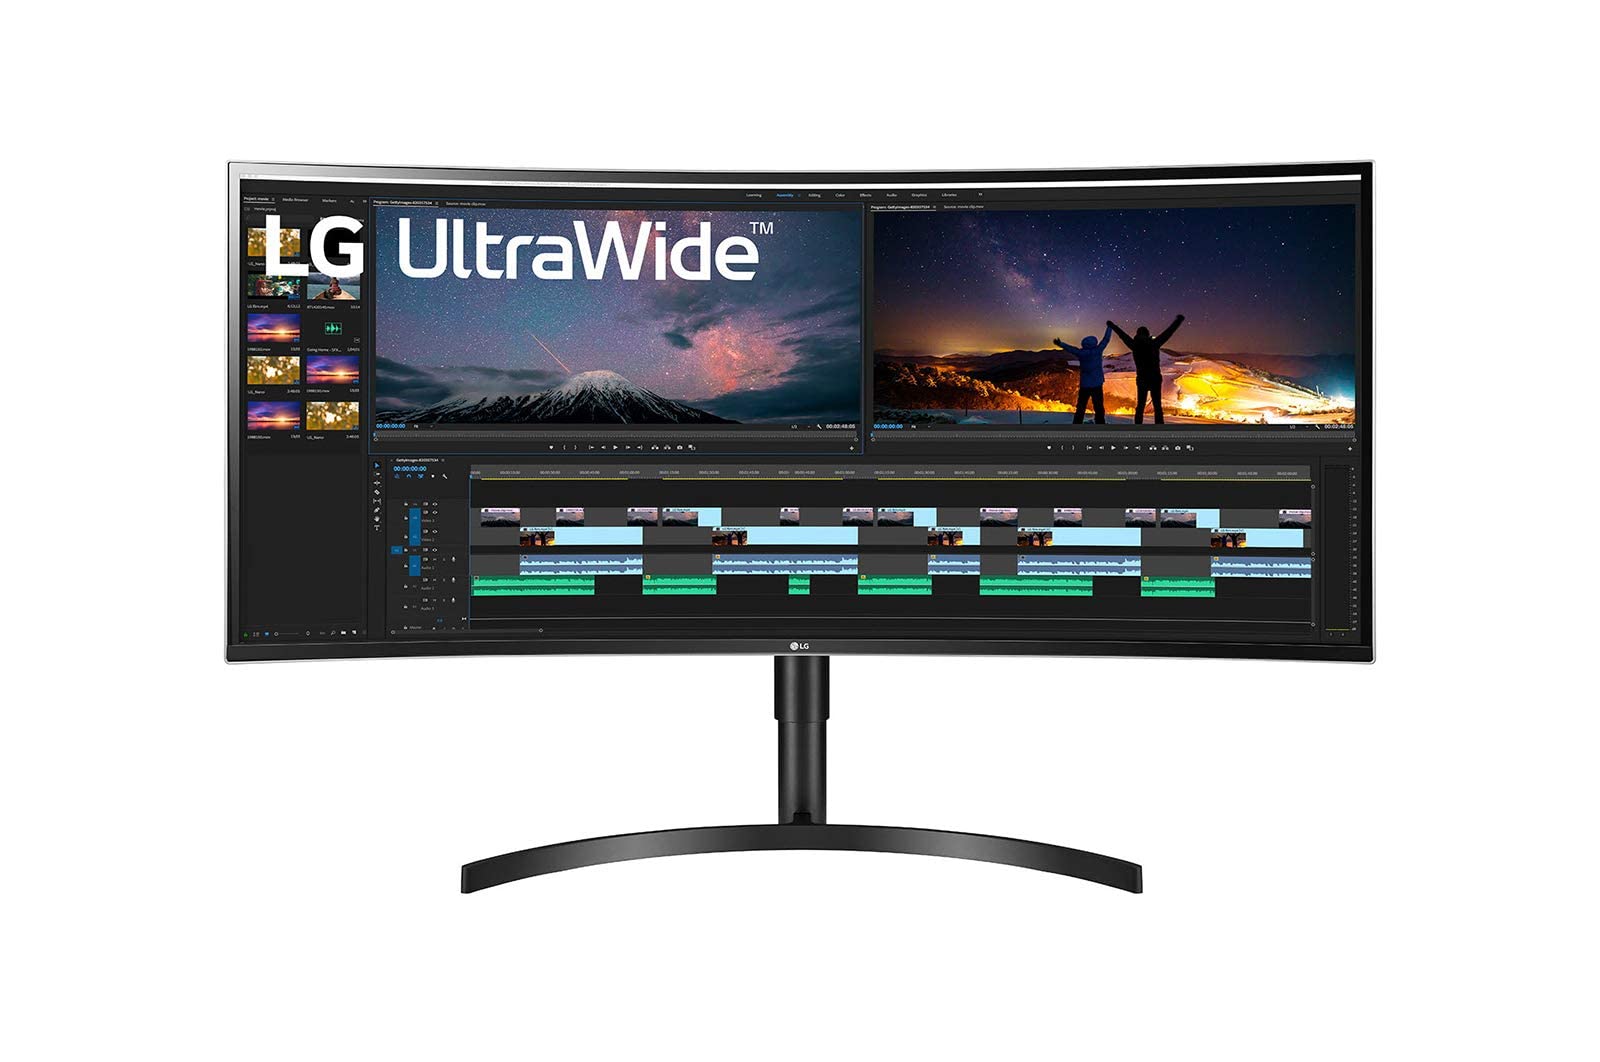 LG 38” QHD+ IPS Curved UltraWide Monitor (3840x1600) with HDR10, Dynamic Active Sync, Black Stabilizer, Flicker Safe, Reader Mode, Onscreen Control...